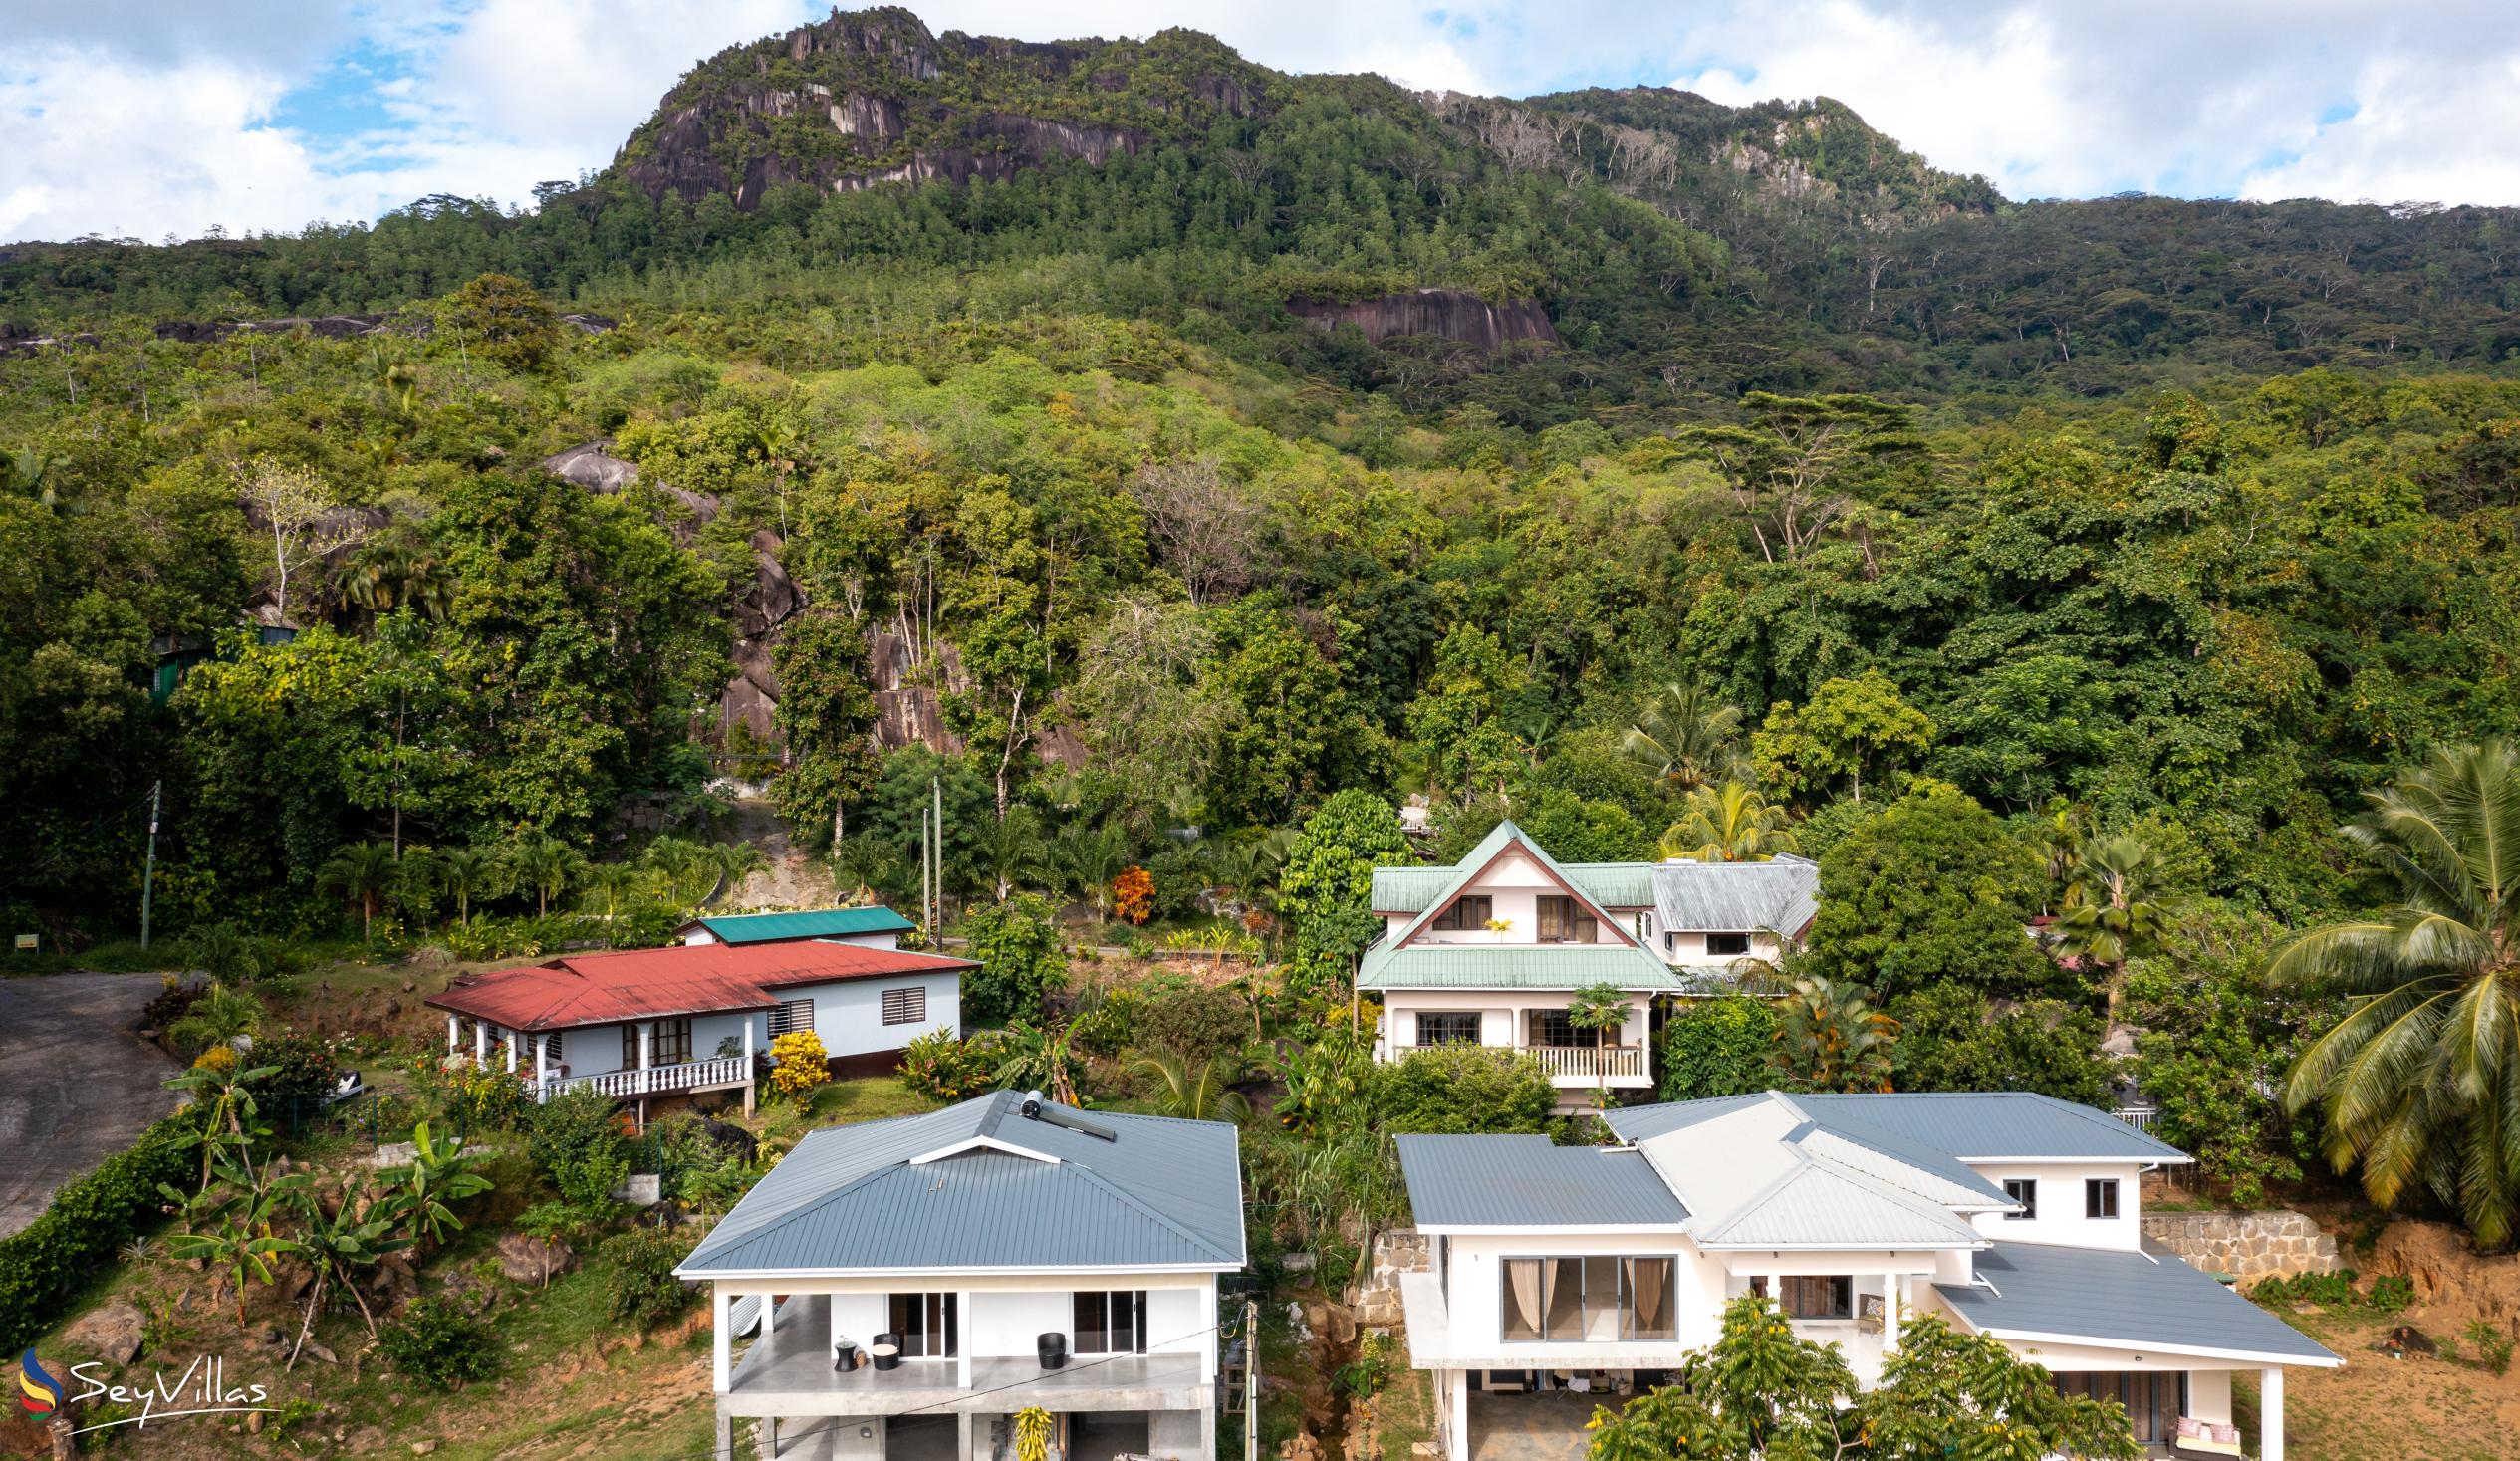 Foto 43: The Orchard Holiday Home - Location - Mahé (Seychelles)